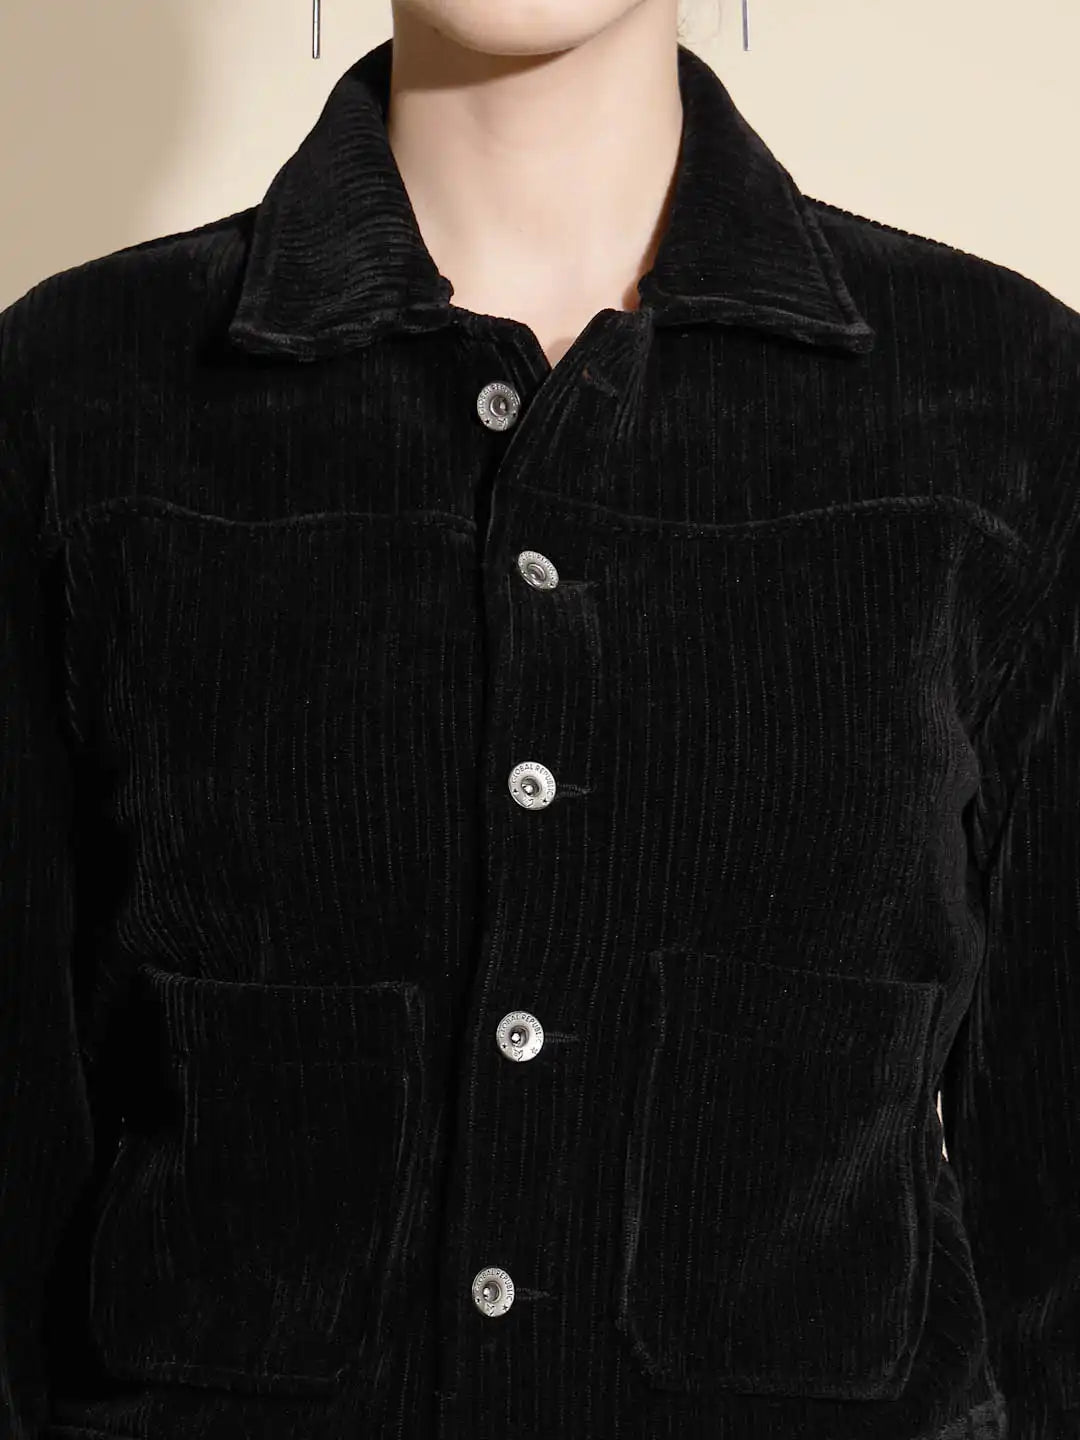 Black Solid Full Sleeve Collared Neck Suede Jacket